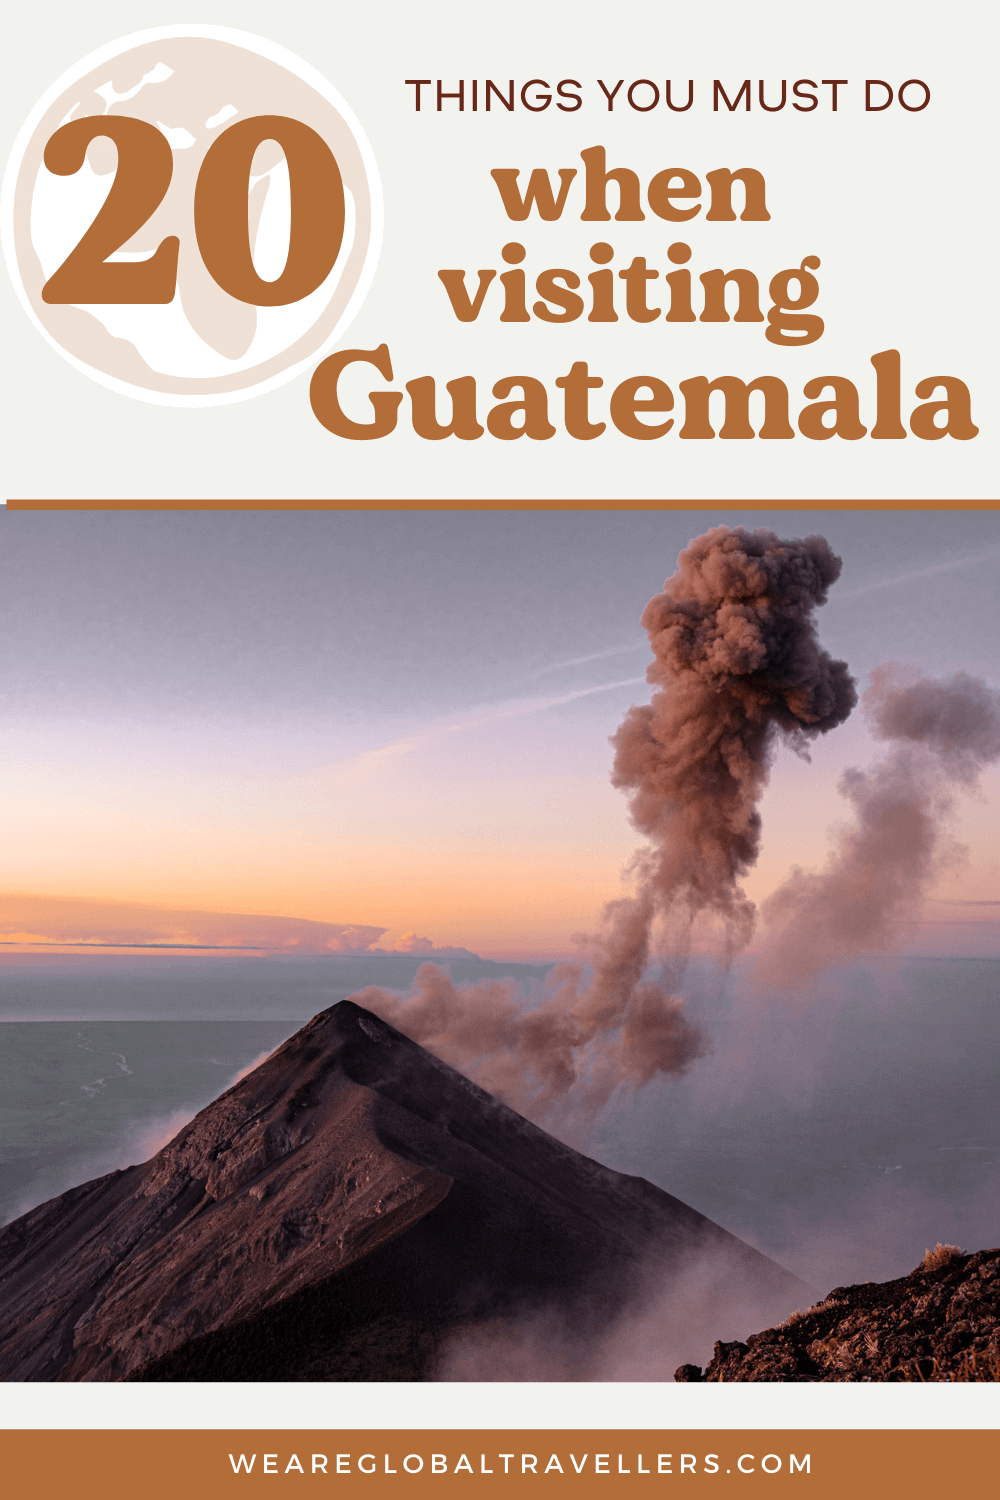 The best things to do and see in Guatemala